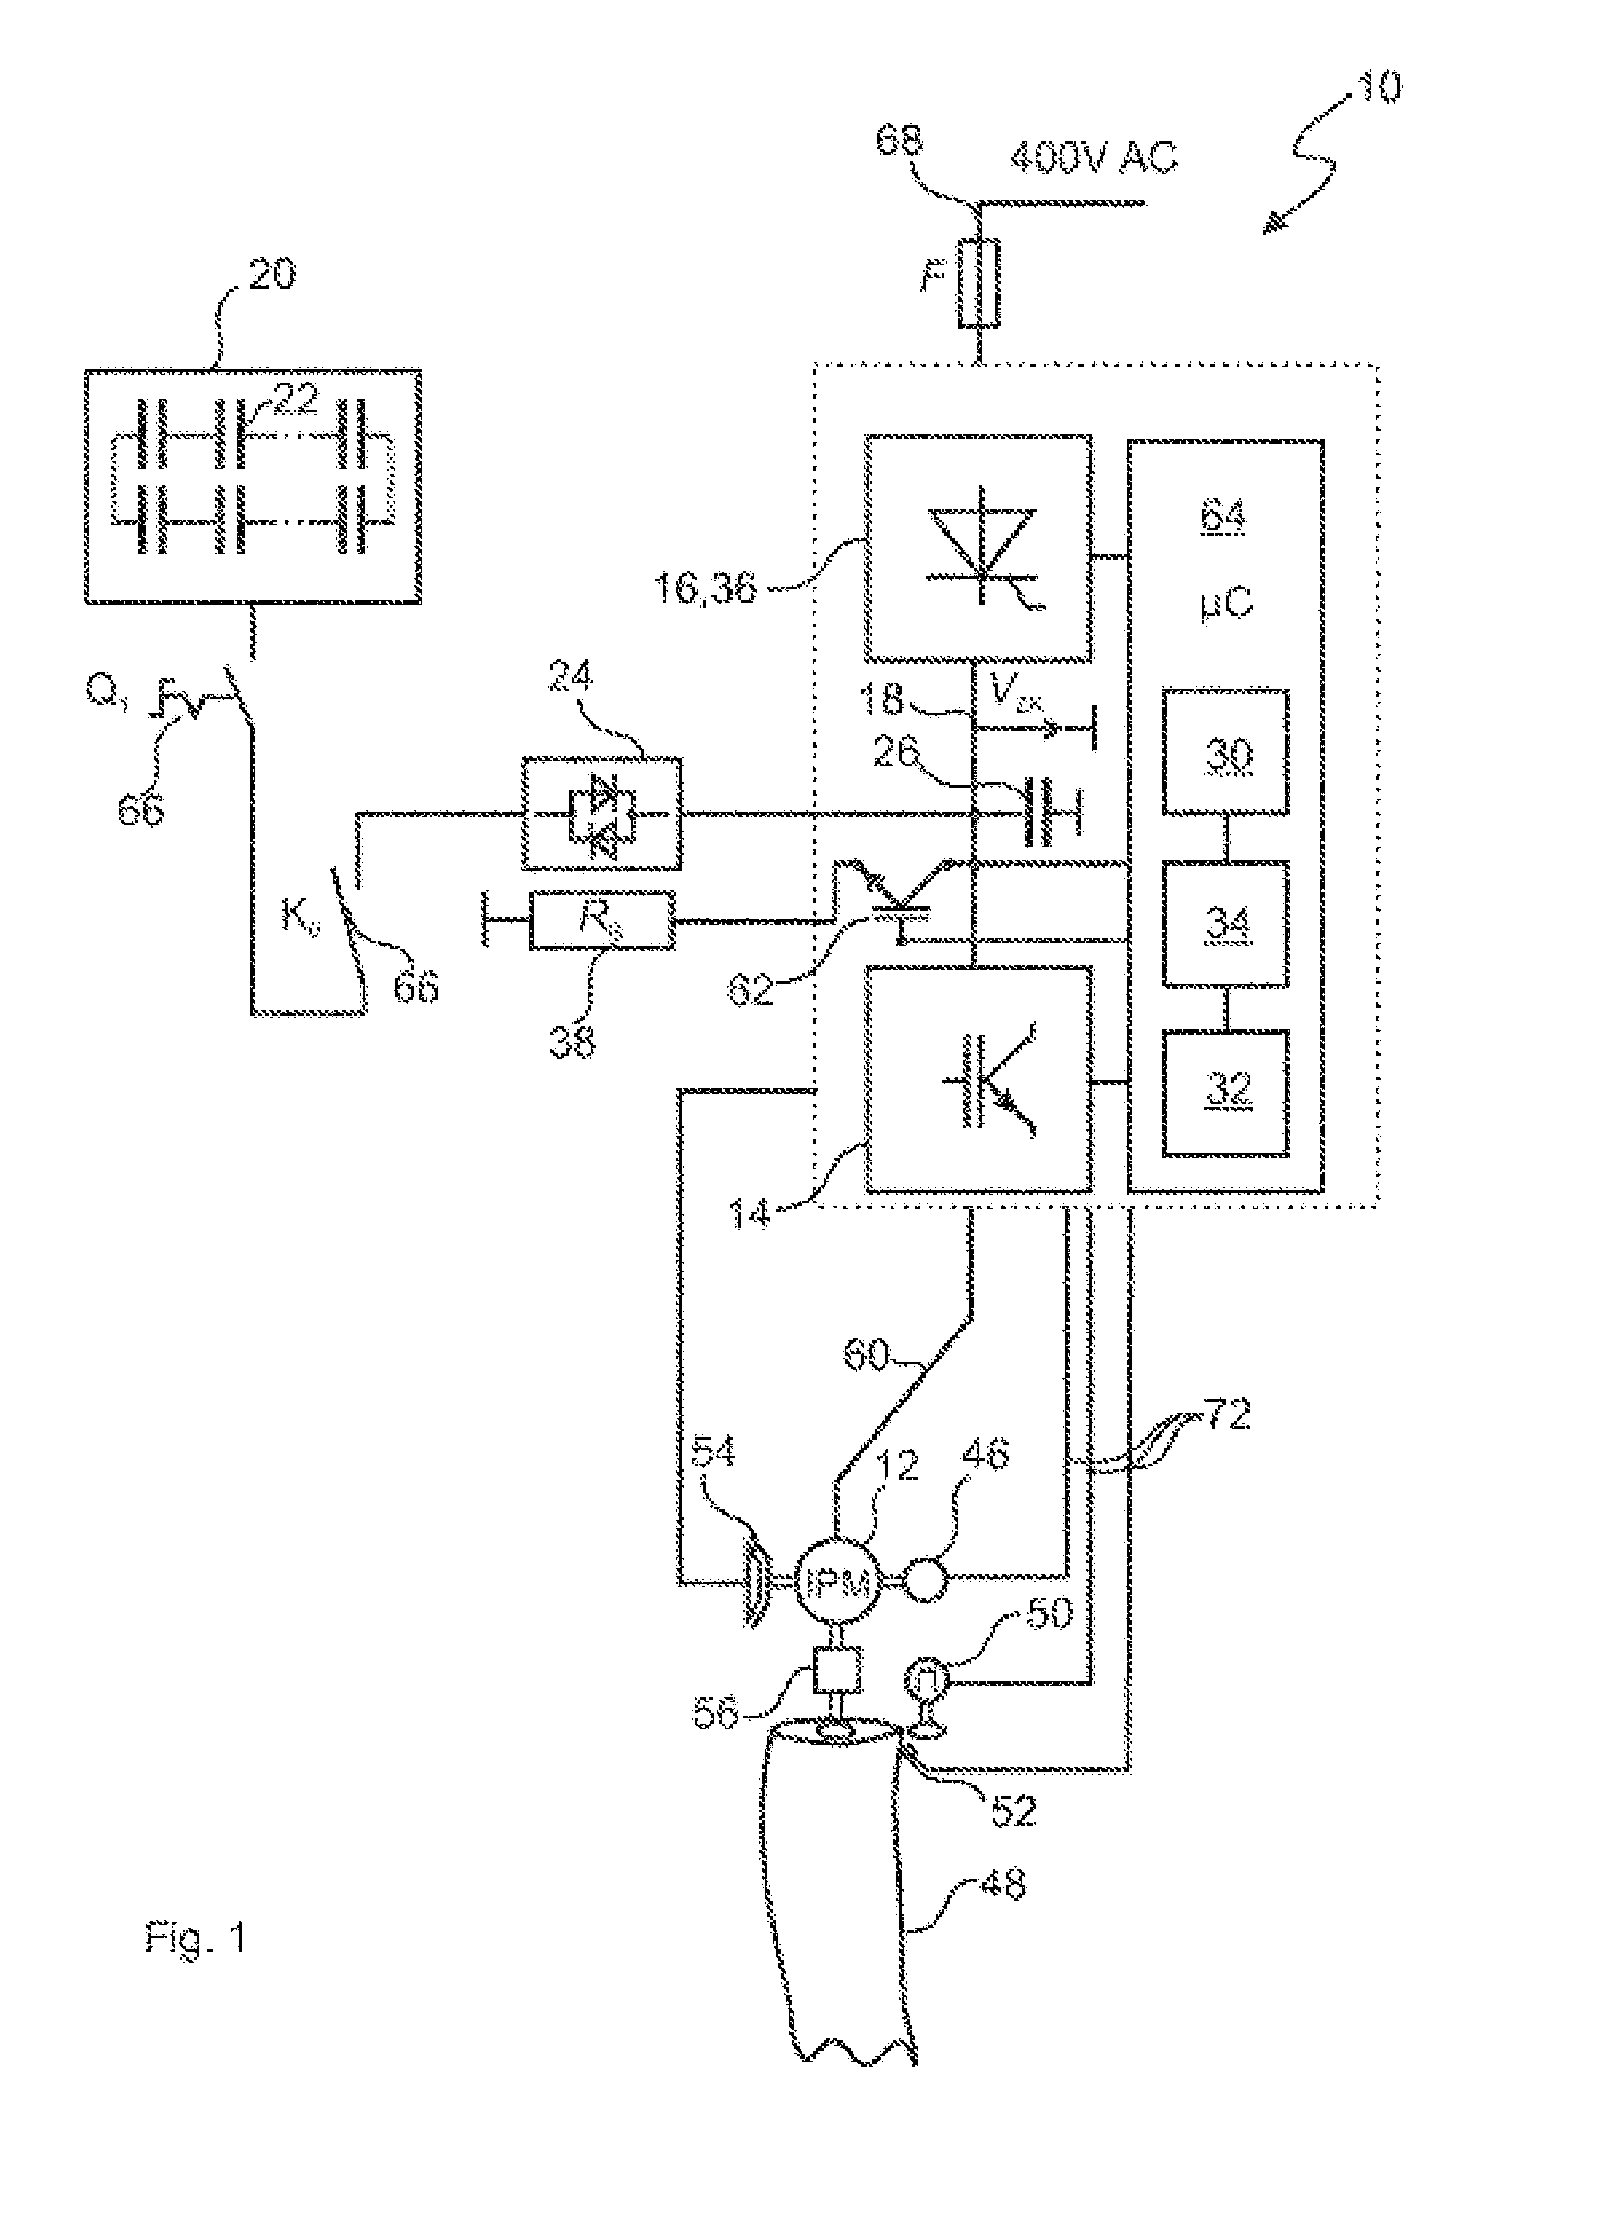 Pitch drive device capable of emergency operation for a wind or water power plant